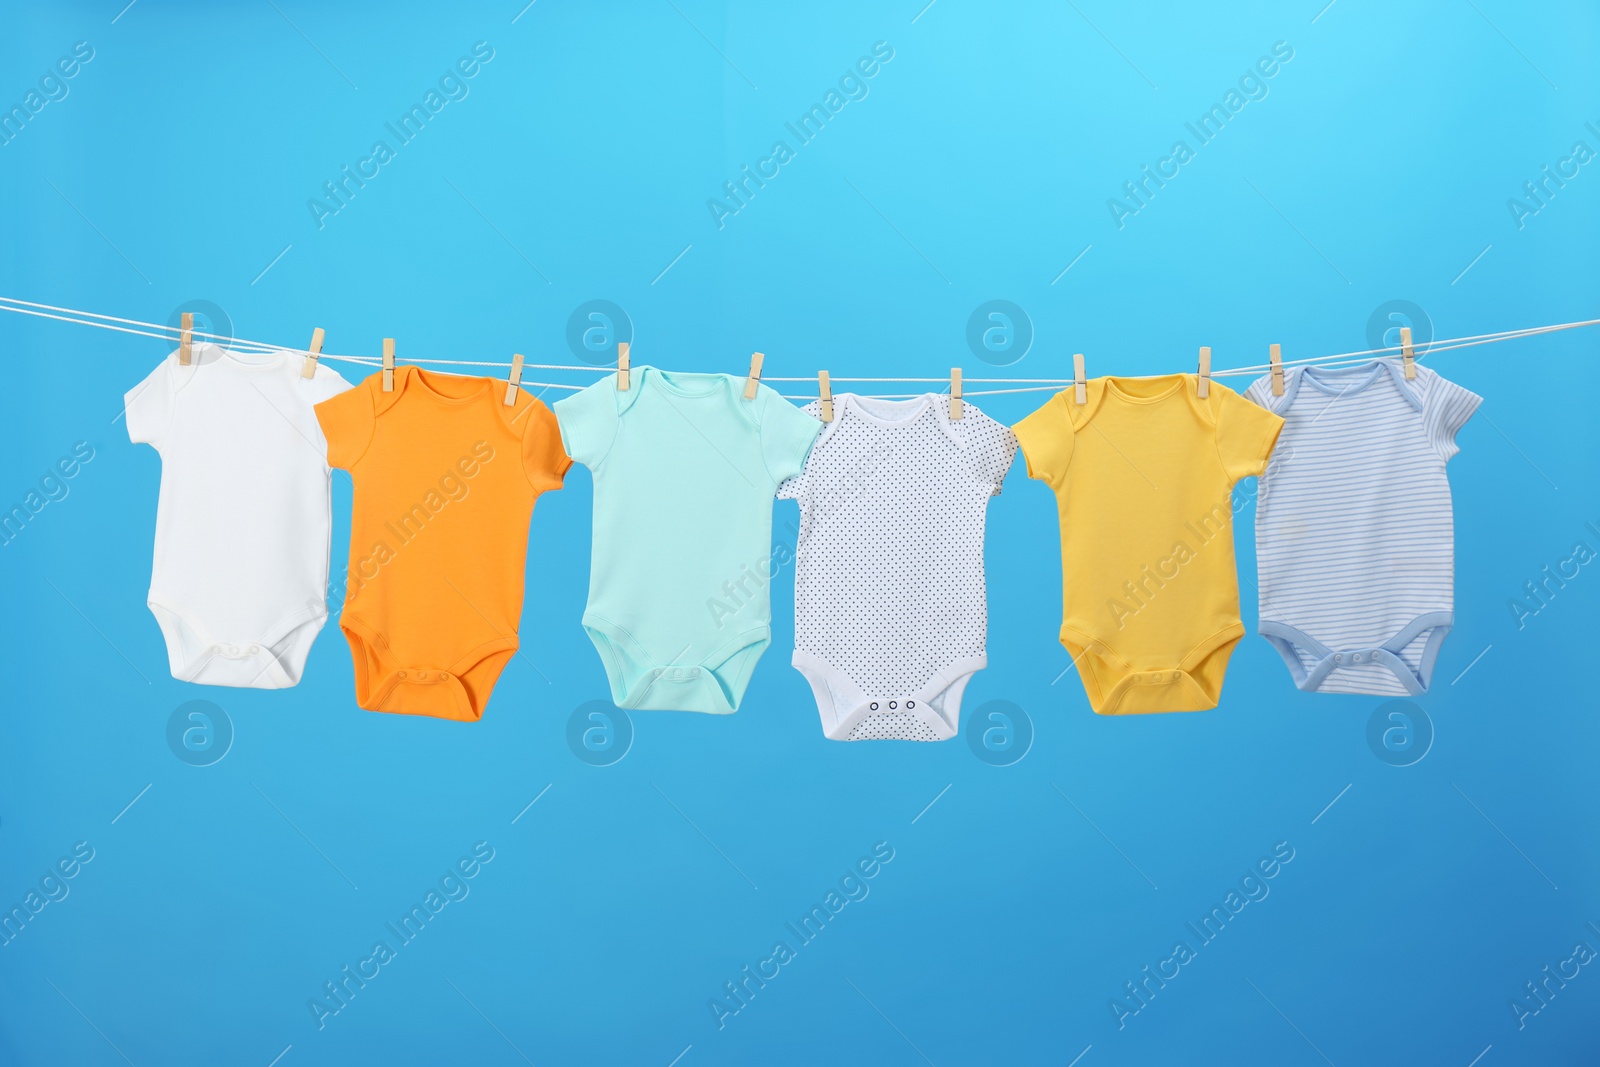 Photo of Colorful baby onesies hanging on clothes line against blue background. Laundry day